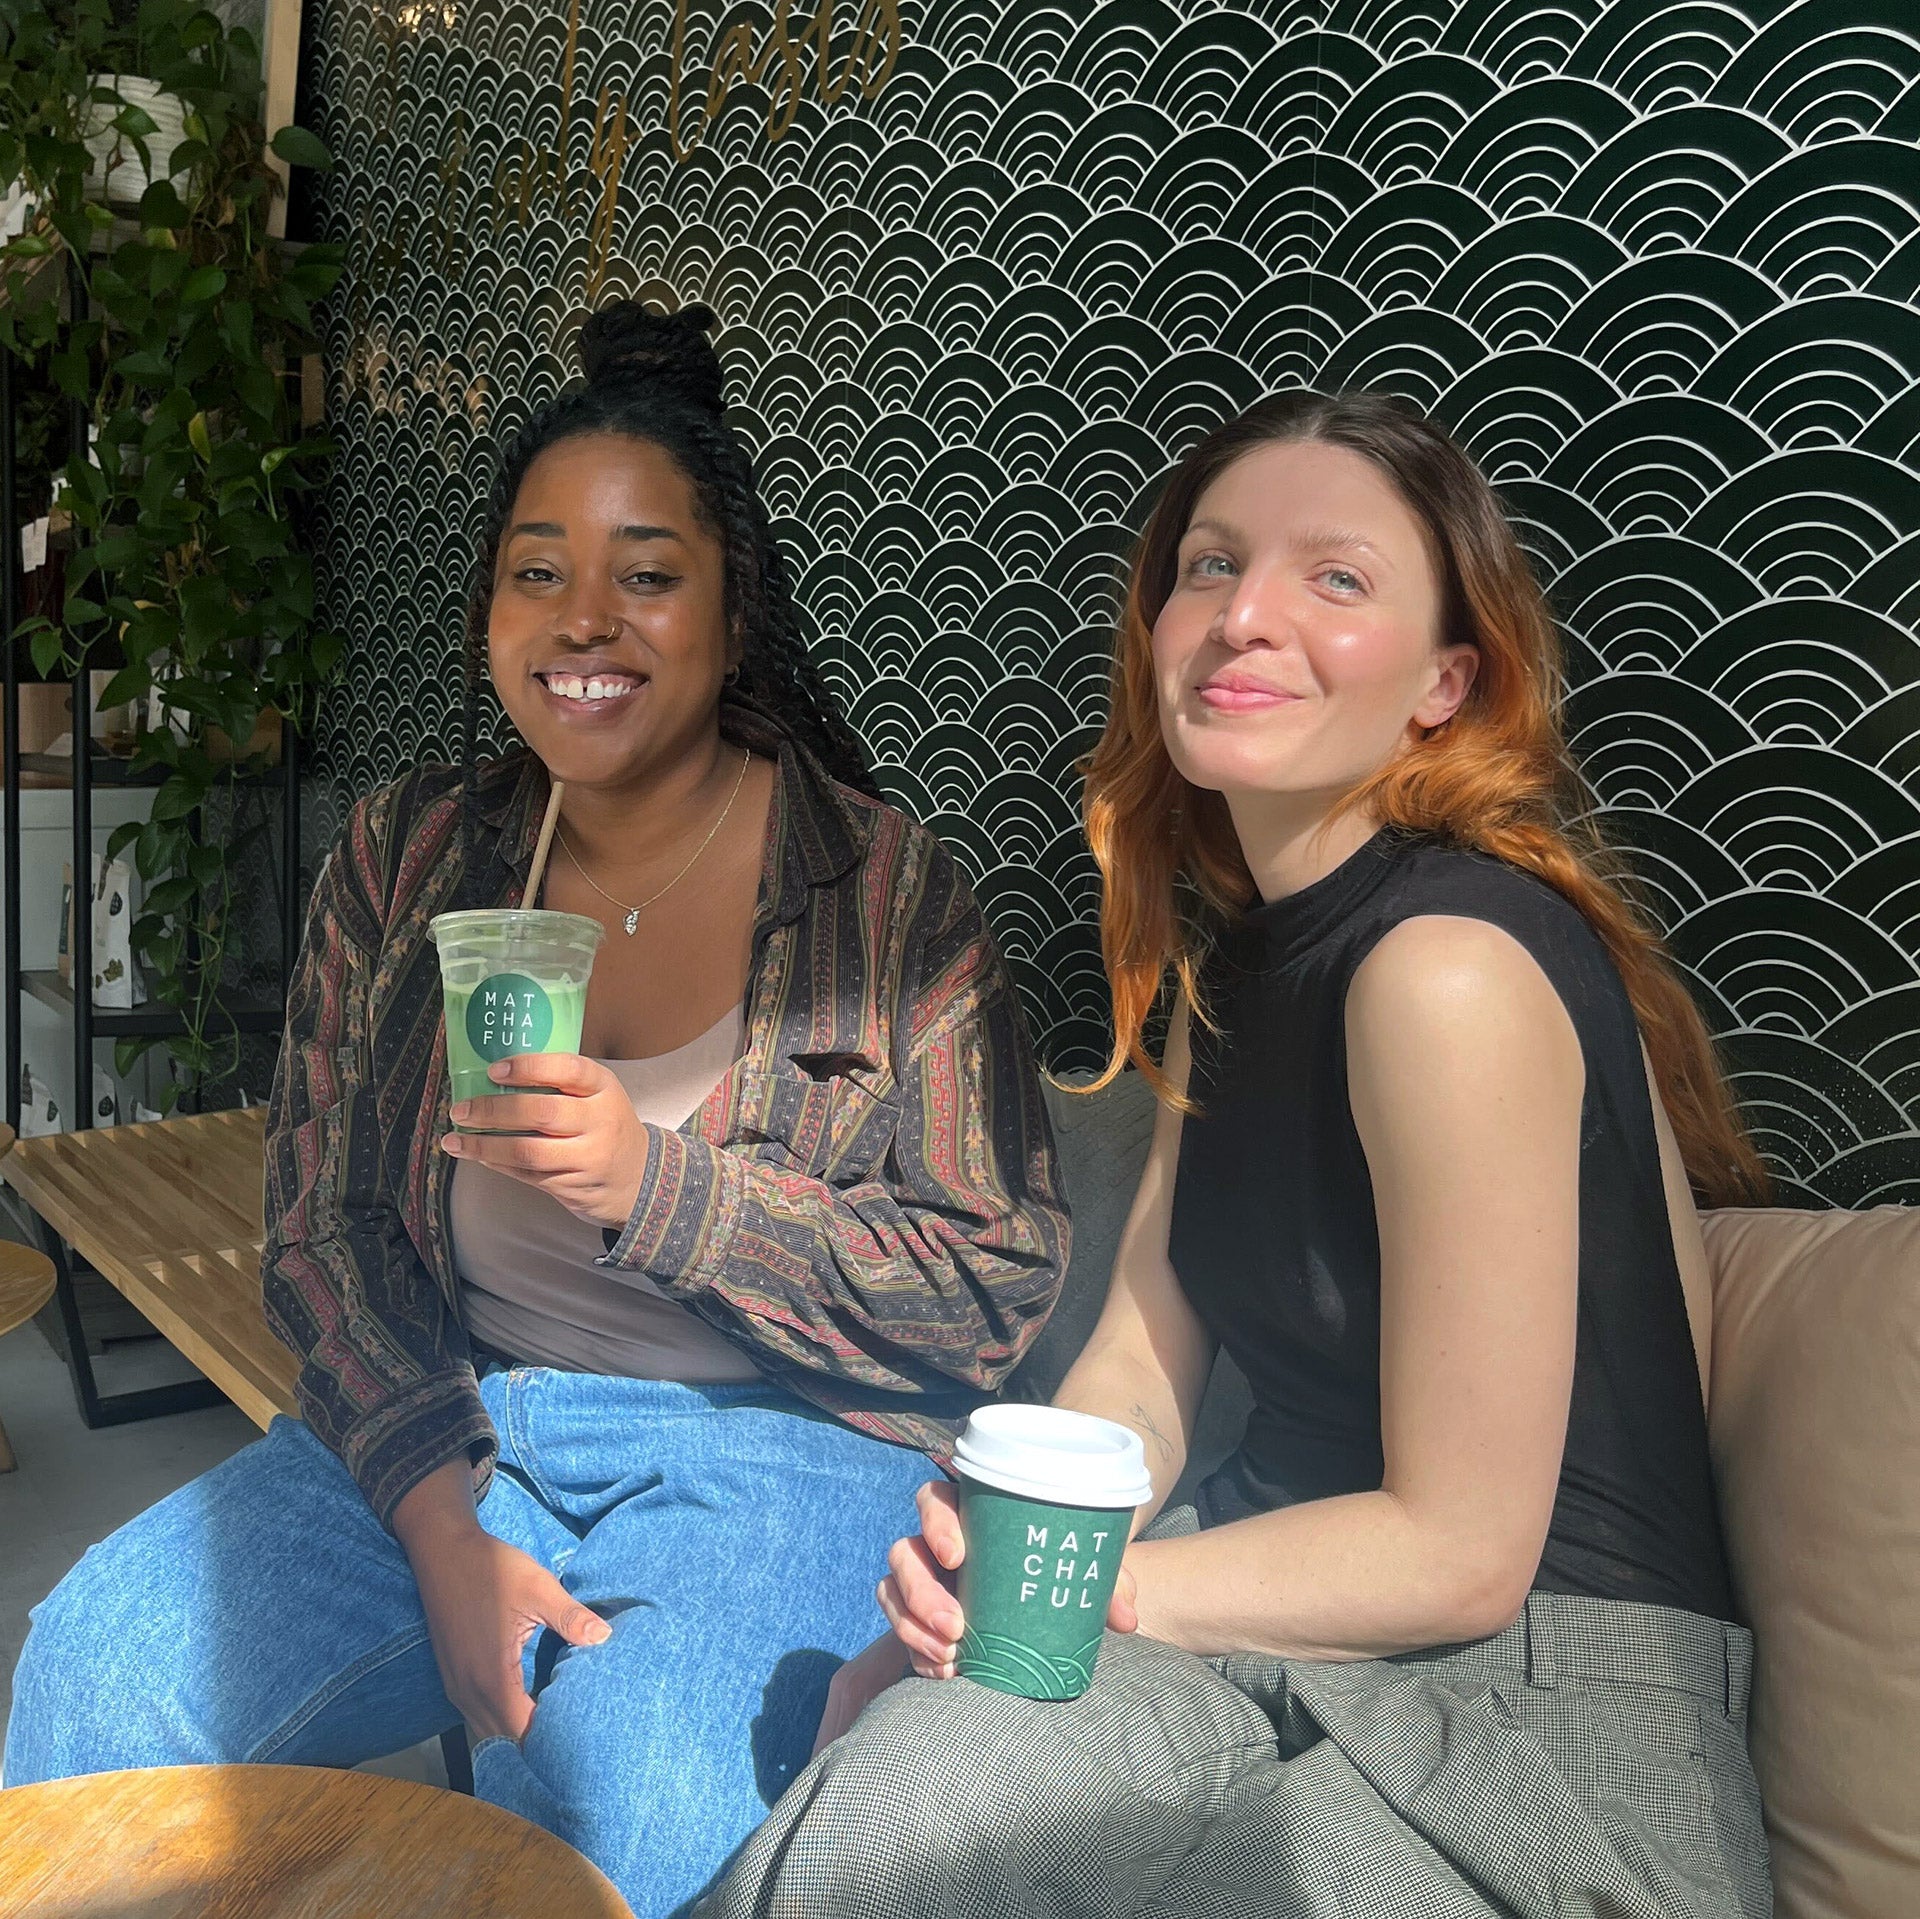 Jordan and Elise drinking matcha lattes and sitting on a bench in the Matchaful Café with a dark green seigaiha patterned wallpaper behind them